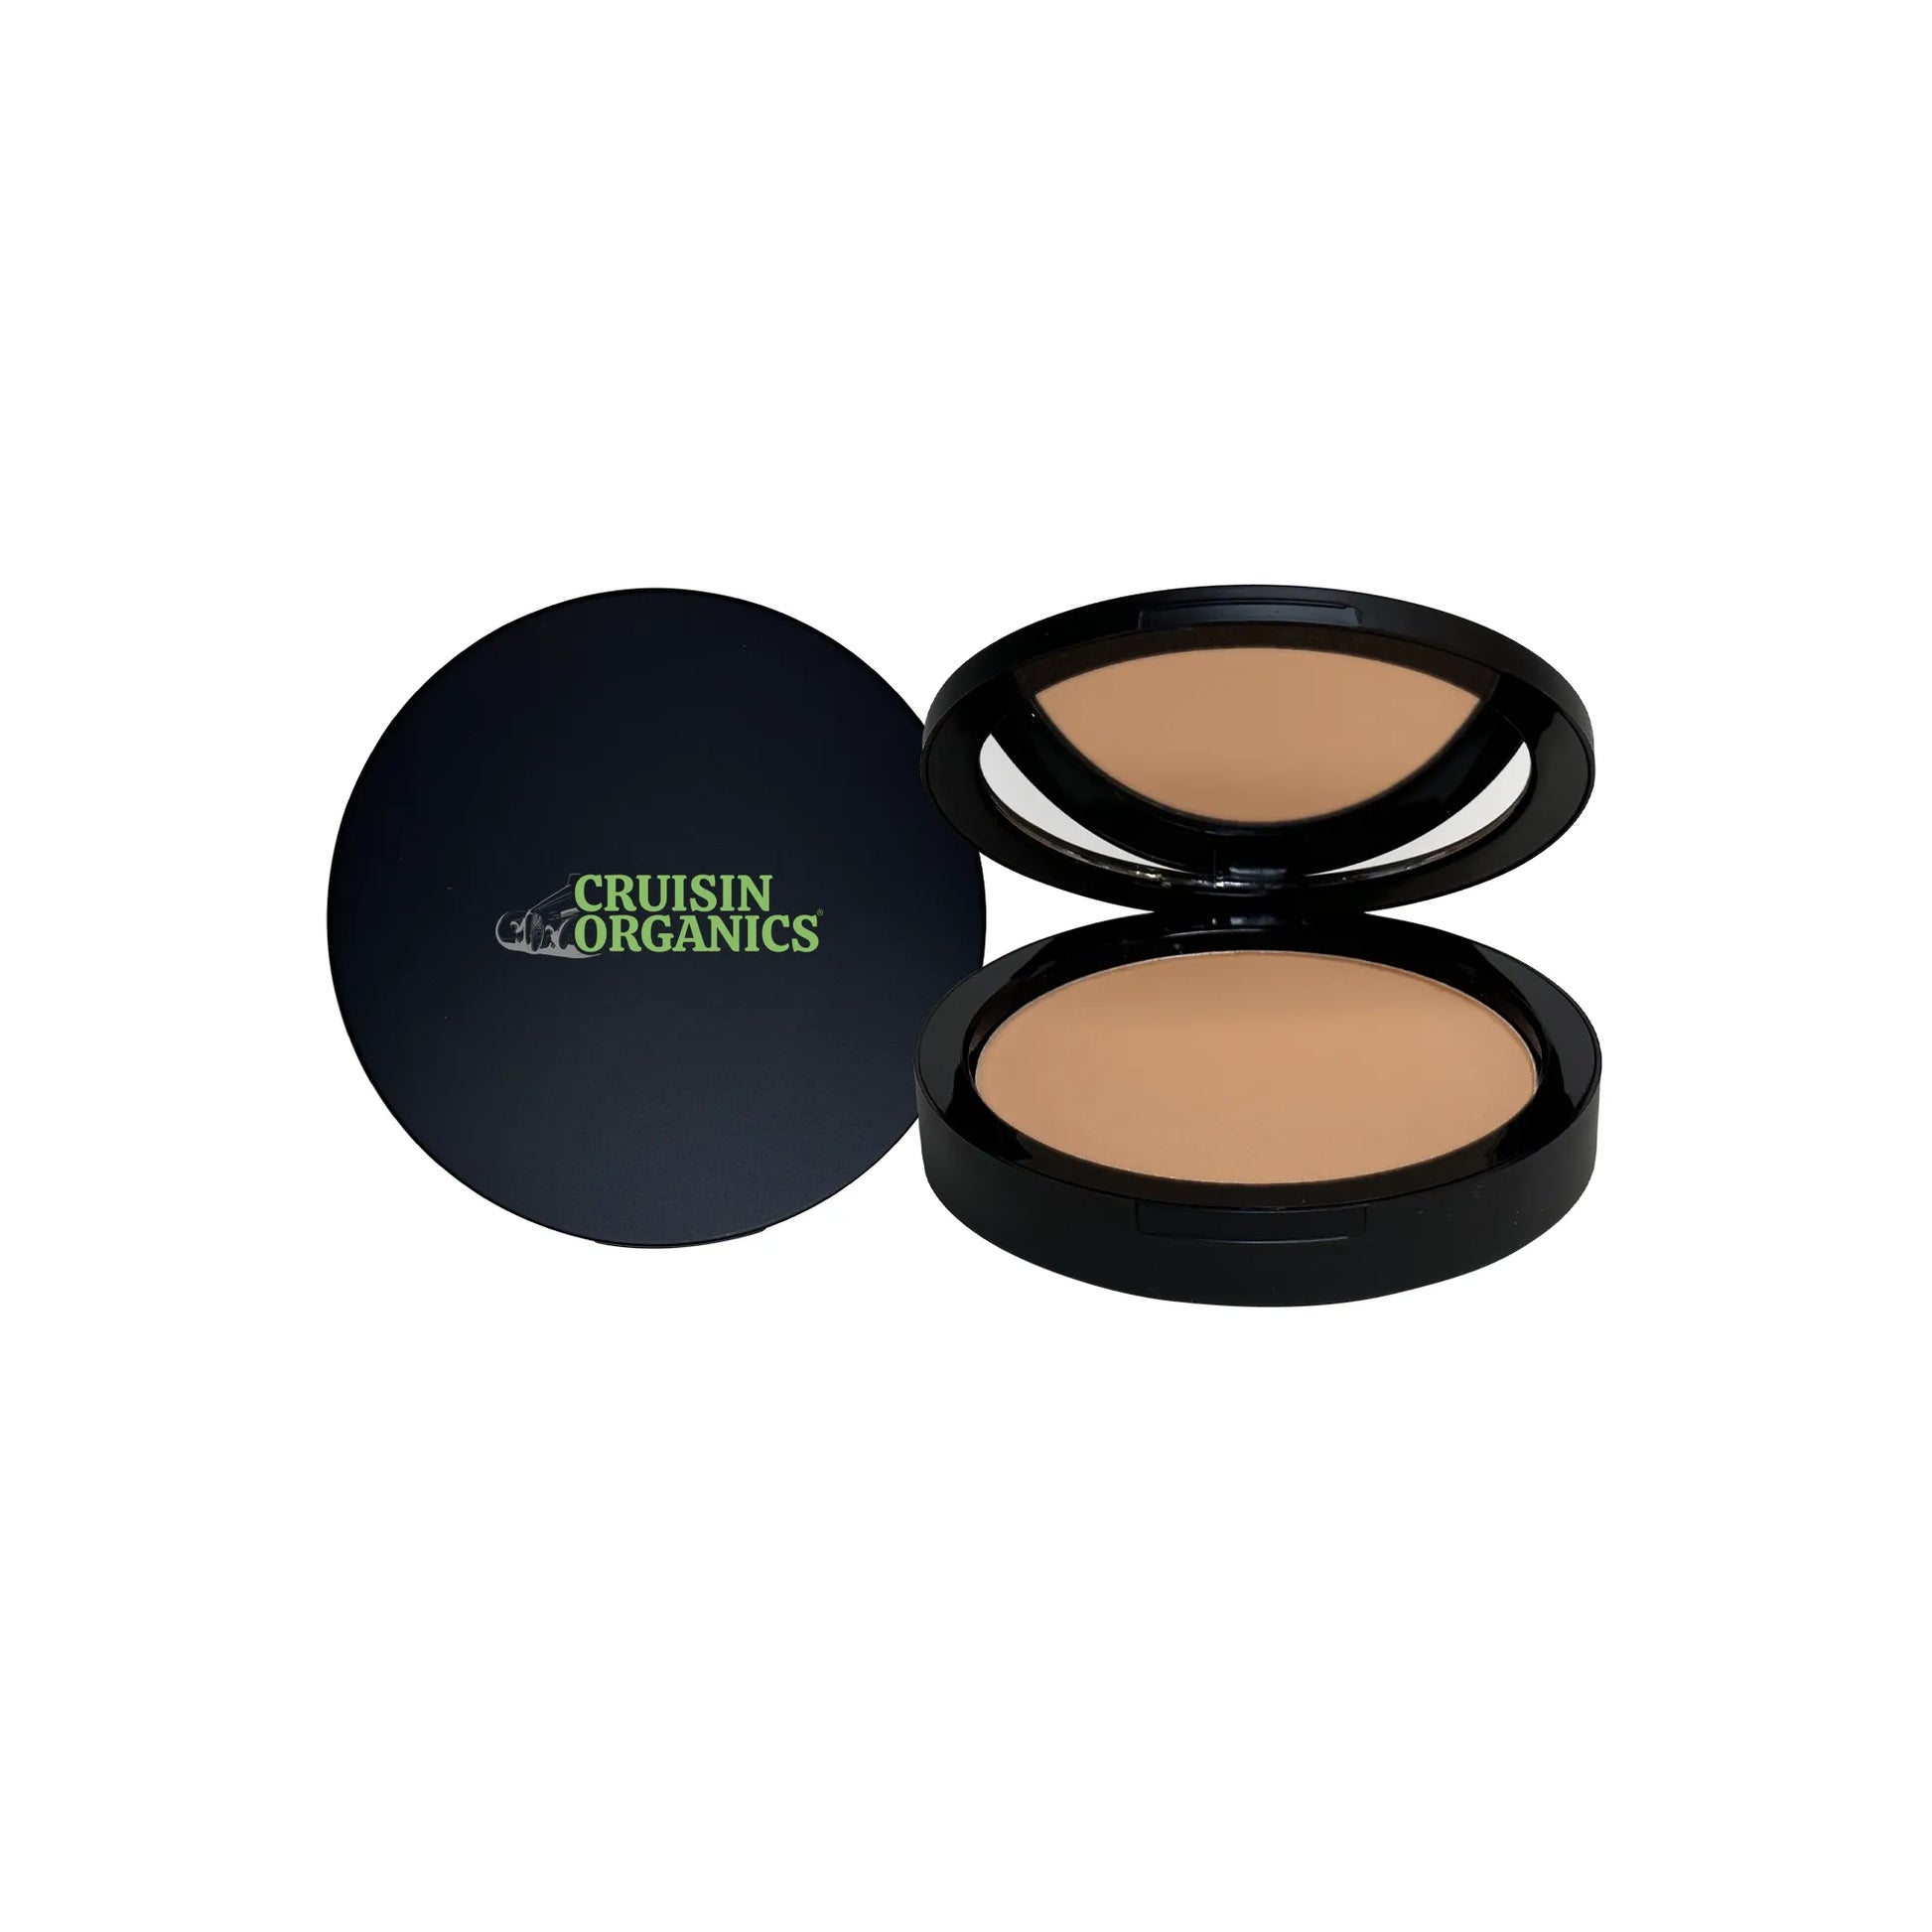 Our dual-blend powder foundation can be used wet or dry for customizable coverage. Perfect for on-the-go application in any climate, it enhances all skin types and adds a radiant glow!